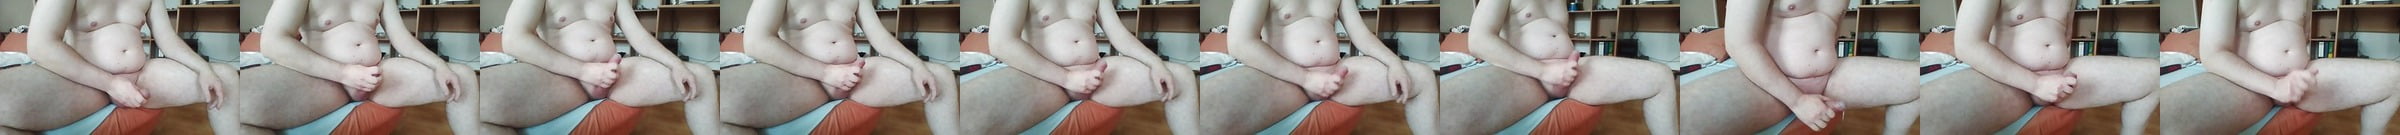 JOI Jerk Off Moaning And Cum Homemade Amateur Gay Porn 67 XHamster